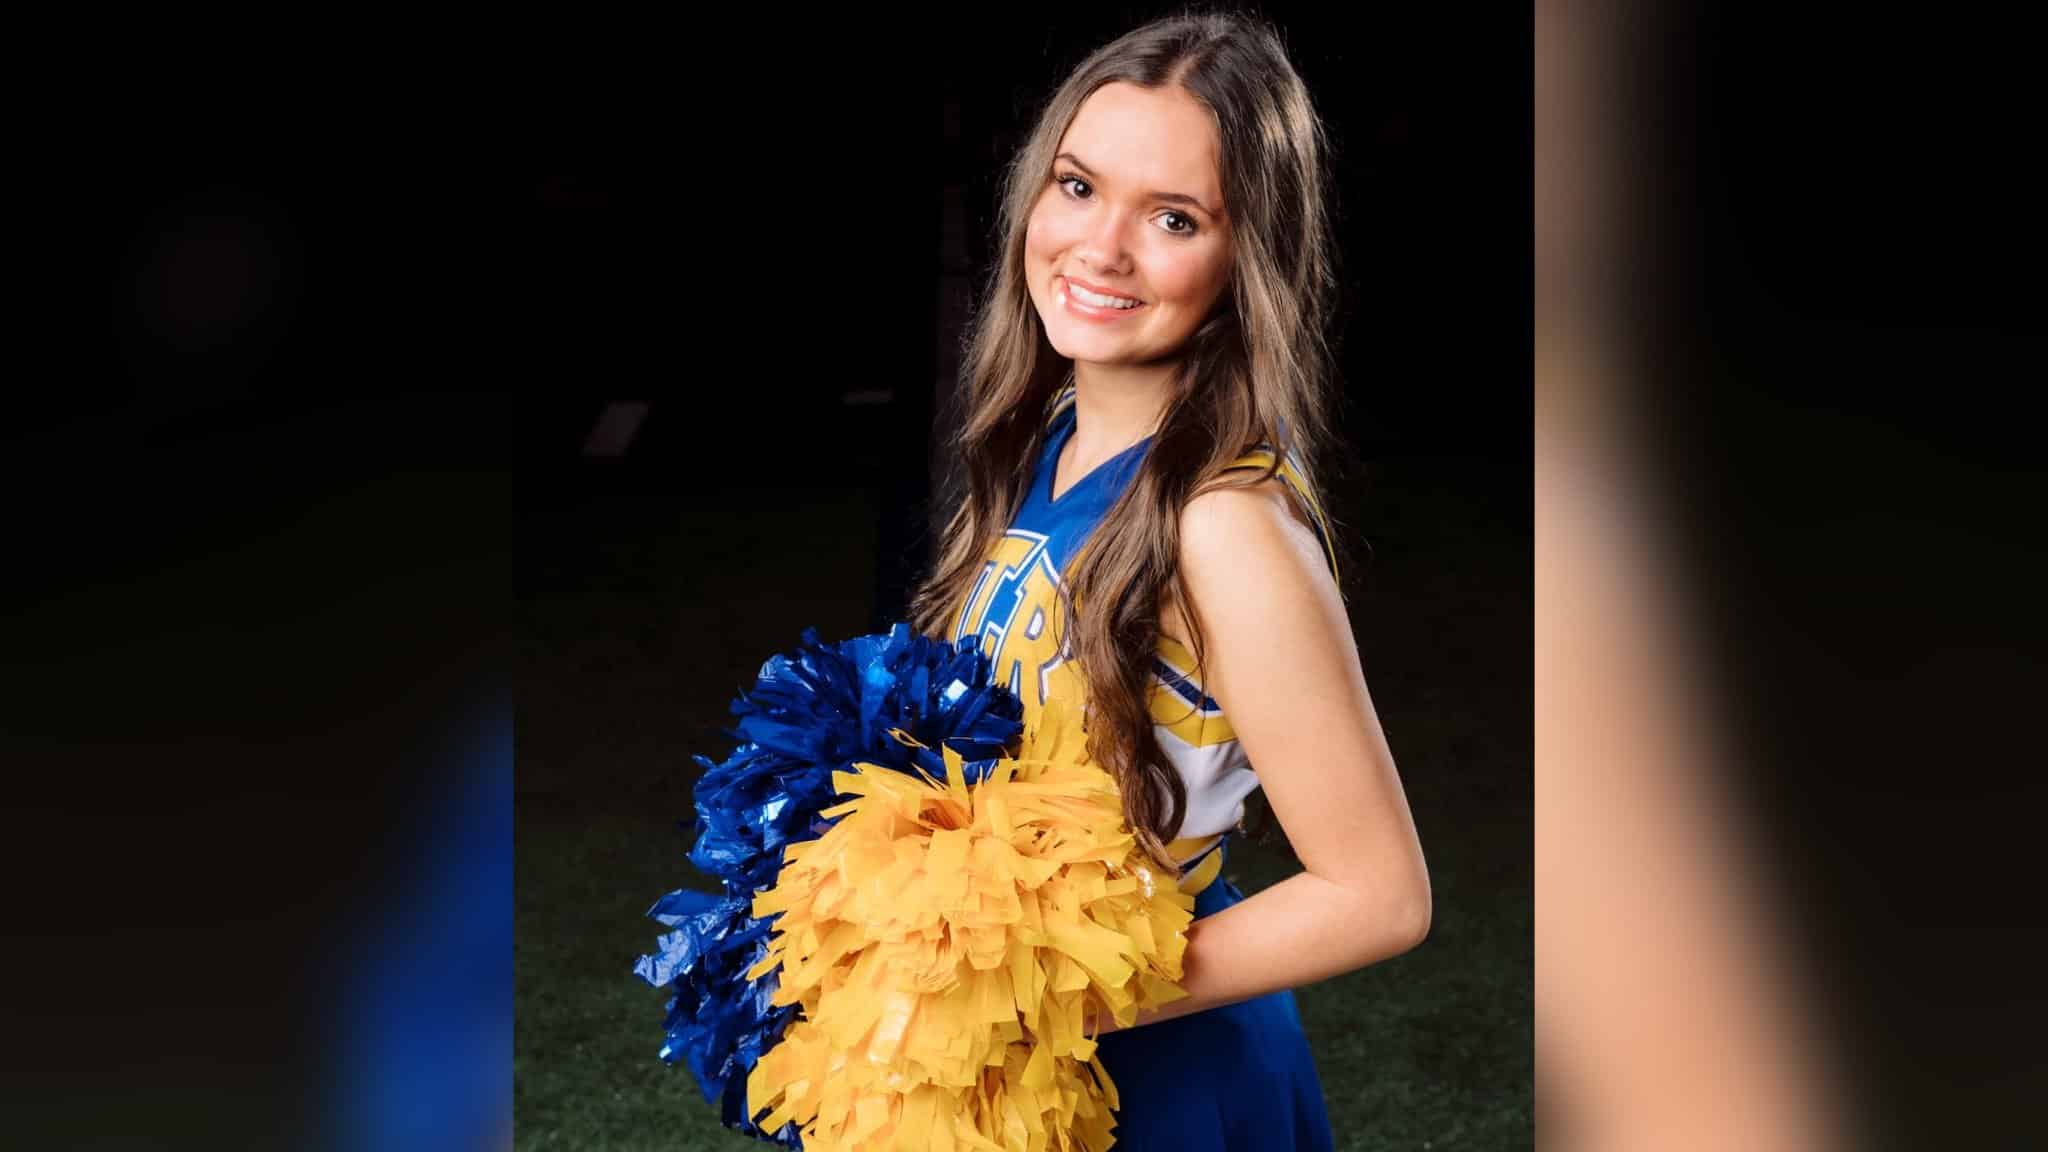 18-Year-Old Varsity High School Cheerleader Dies Suddenly due to Blood Clot - Survive the News